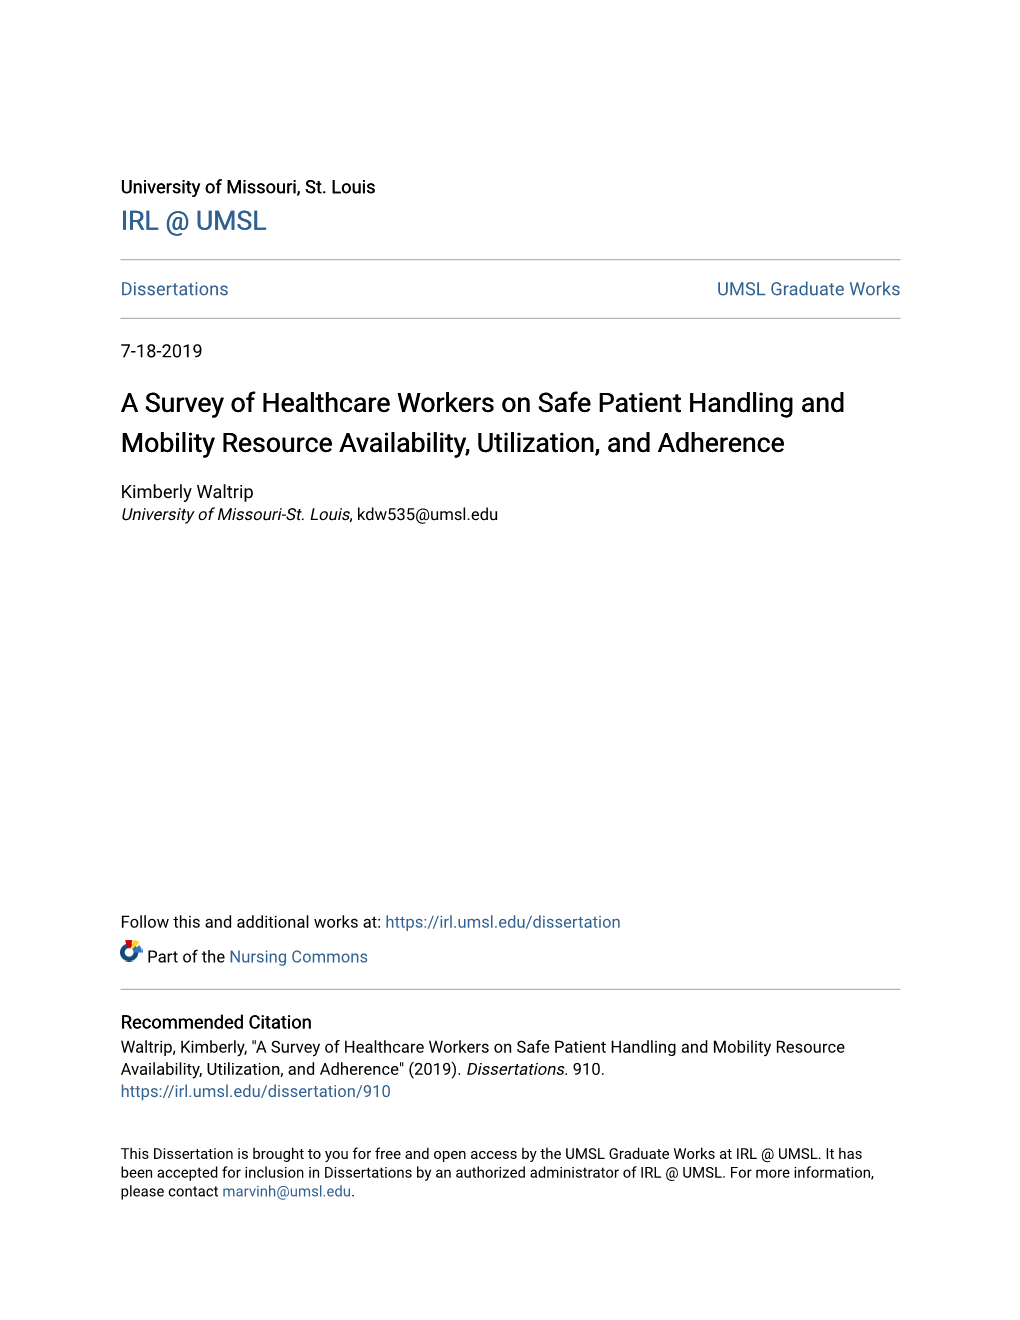 A Survey of Healthcare Workers on Safe Patient Handling and Mobility Resource Availability, Utilization, and Adherence